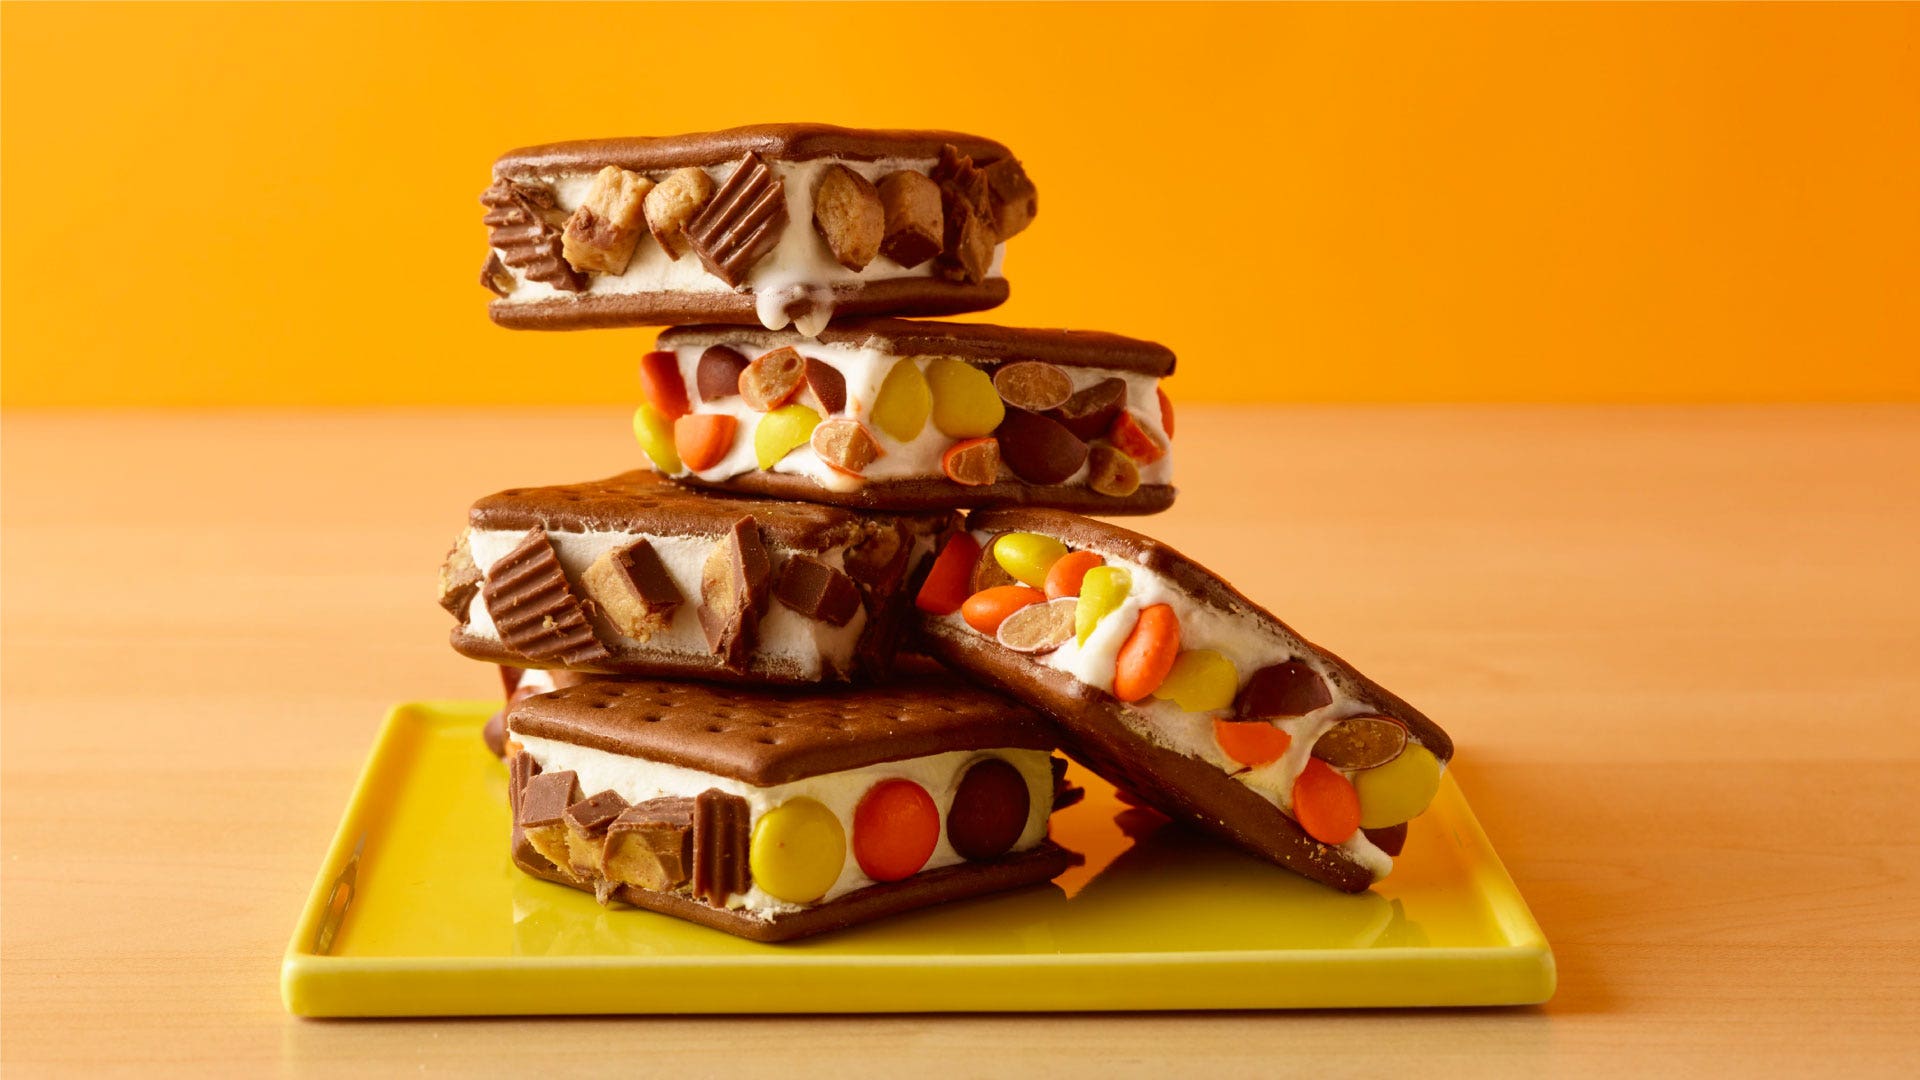 Image of REESE’S Ice Cream Sandwiches With Peanut Butter Candy Crumbles